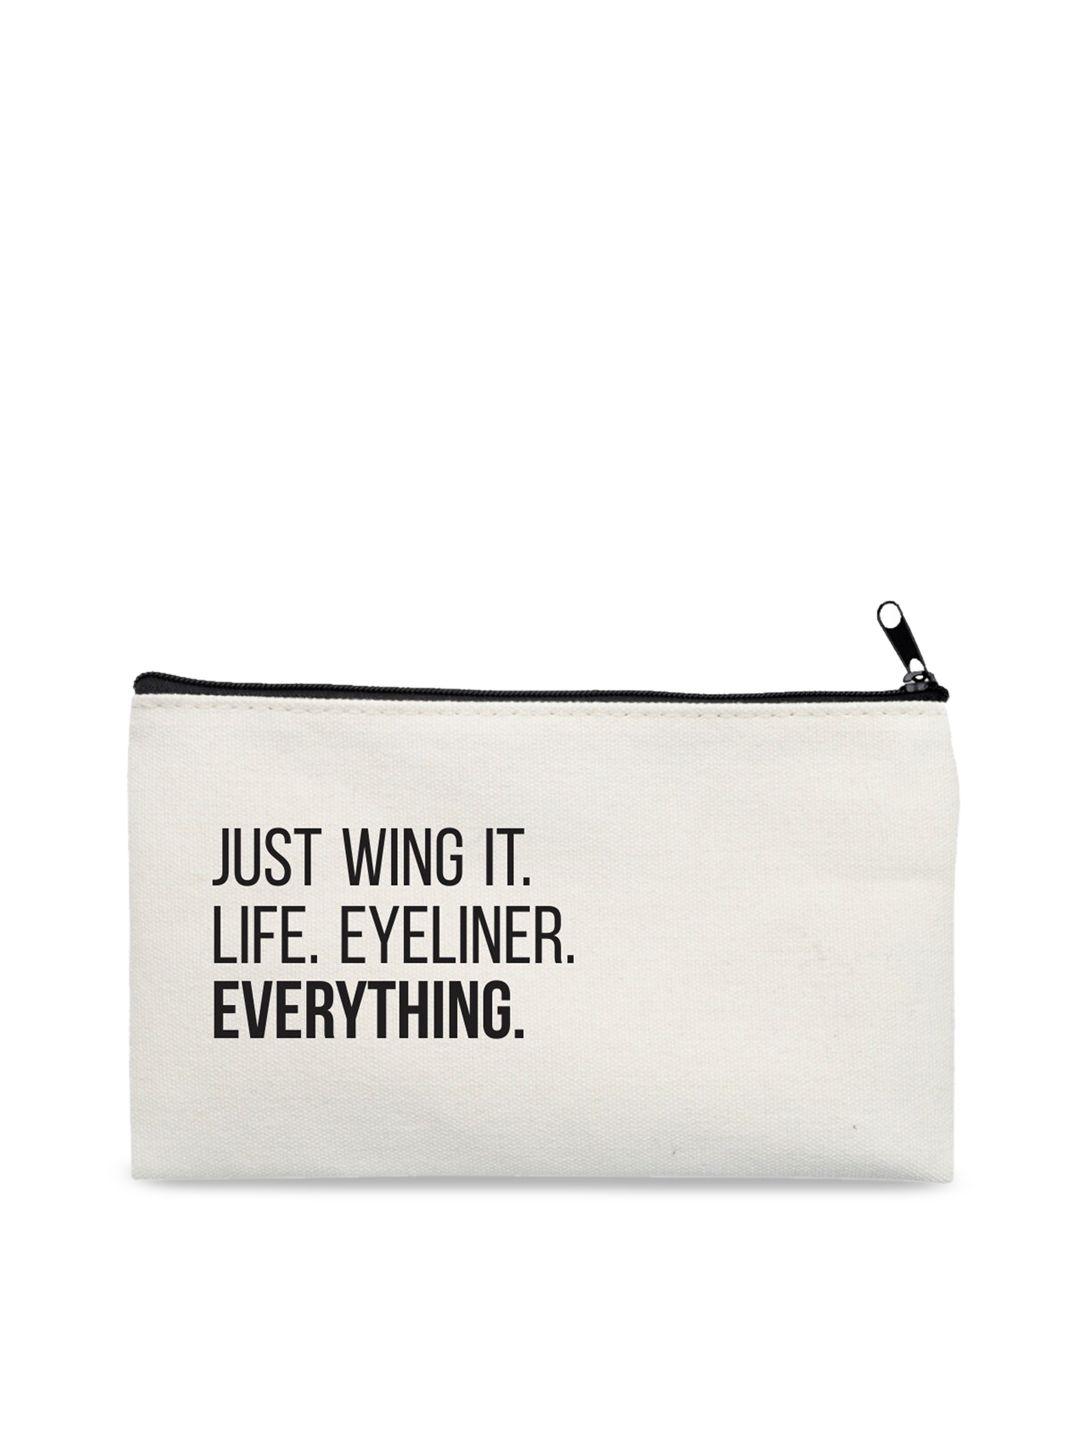 the art people  off white & black typography printed travel pouch